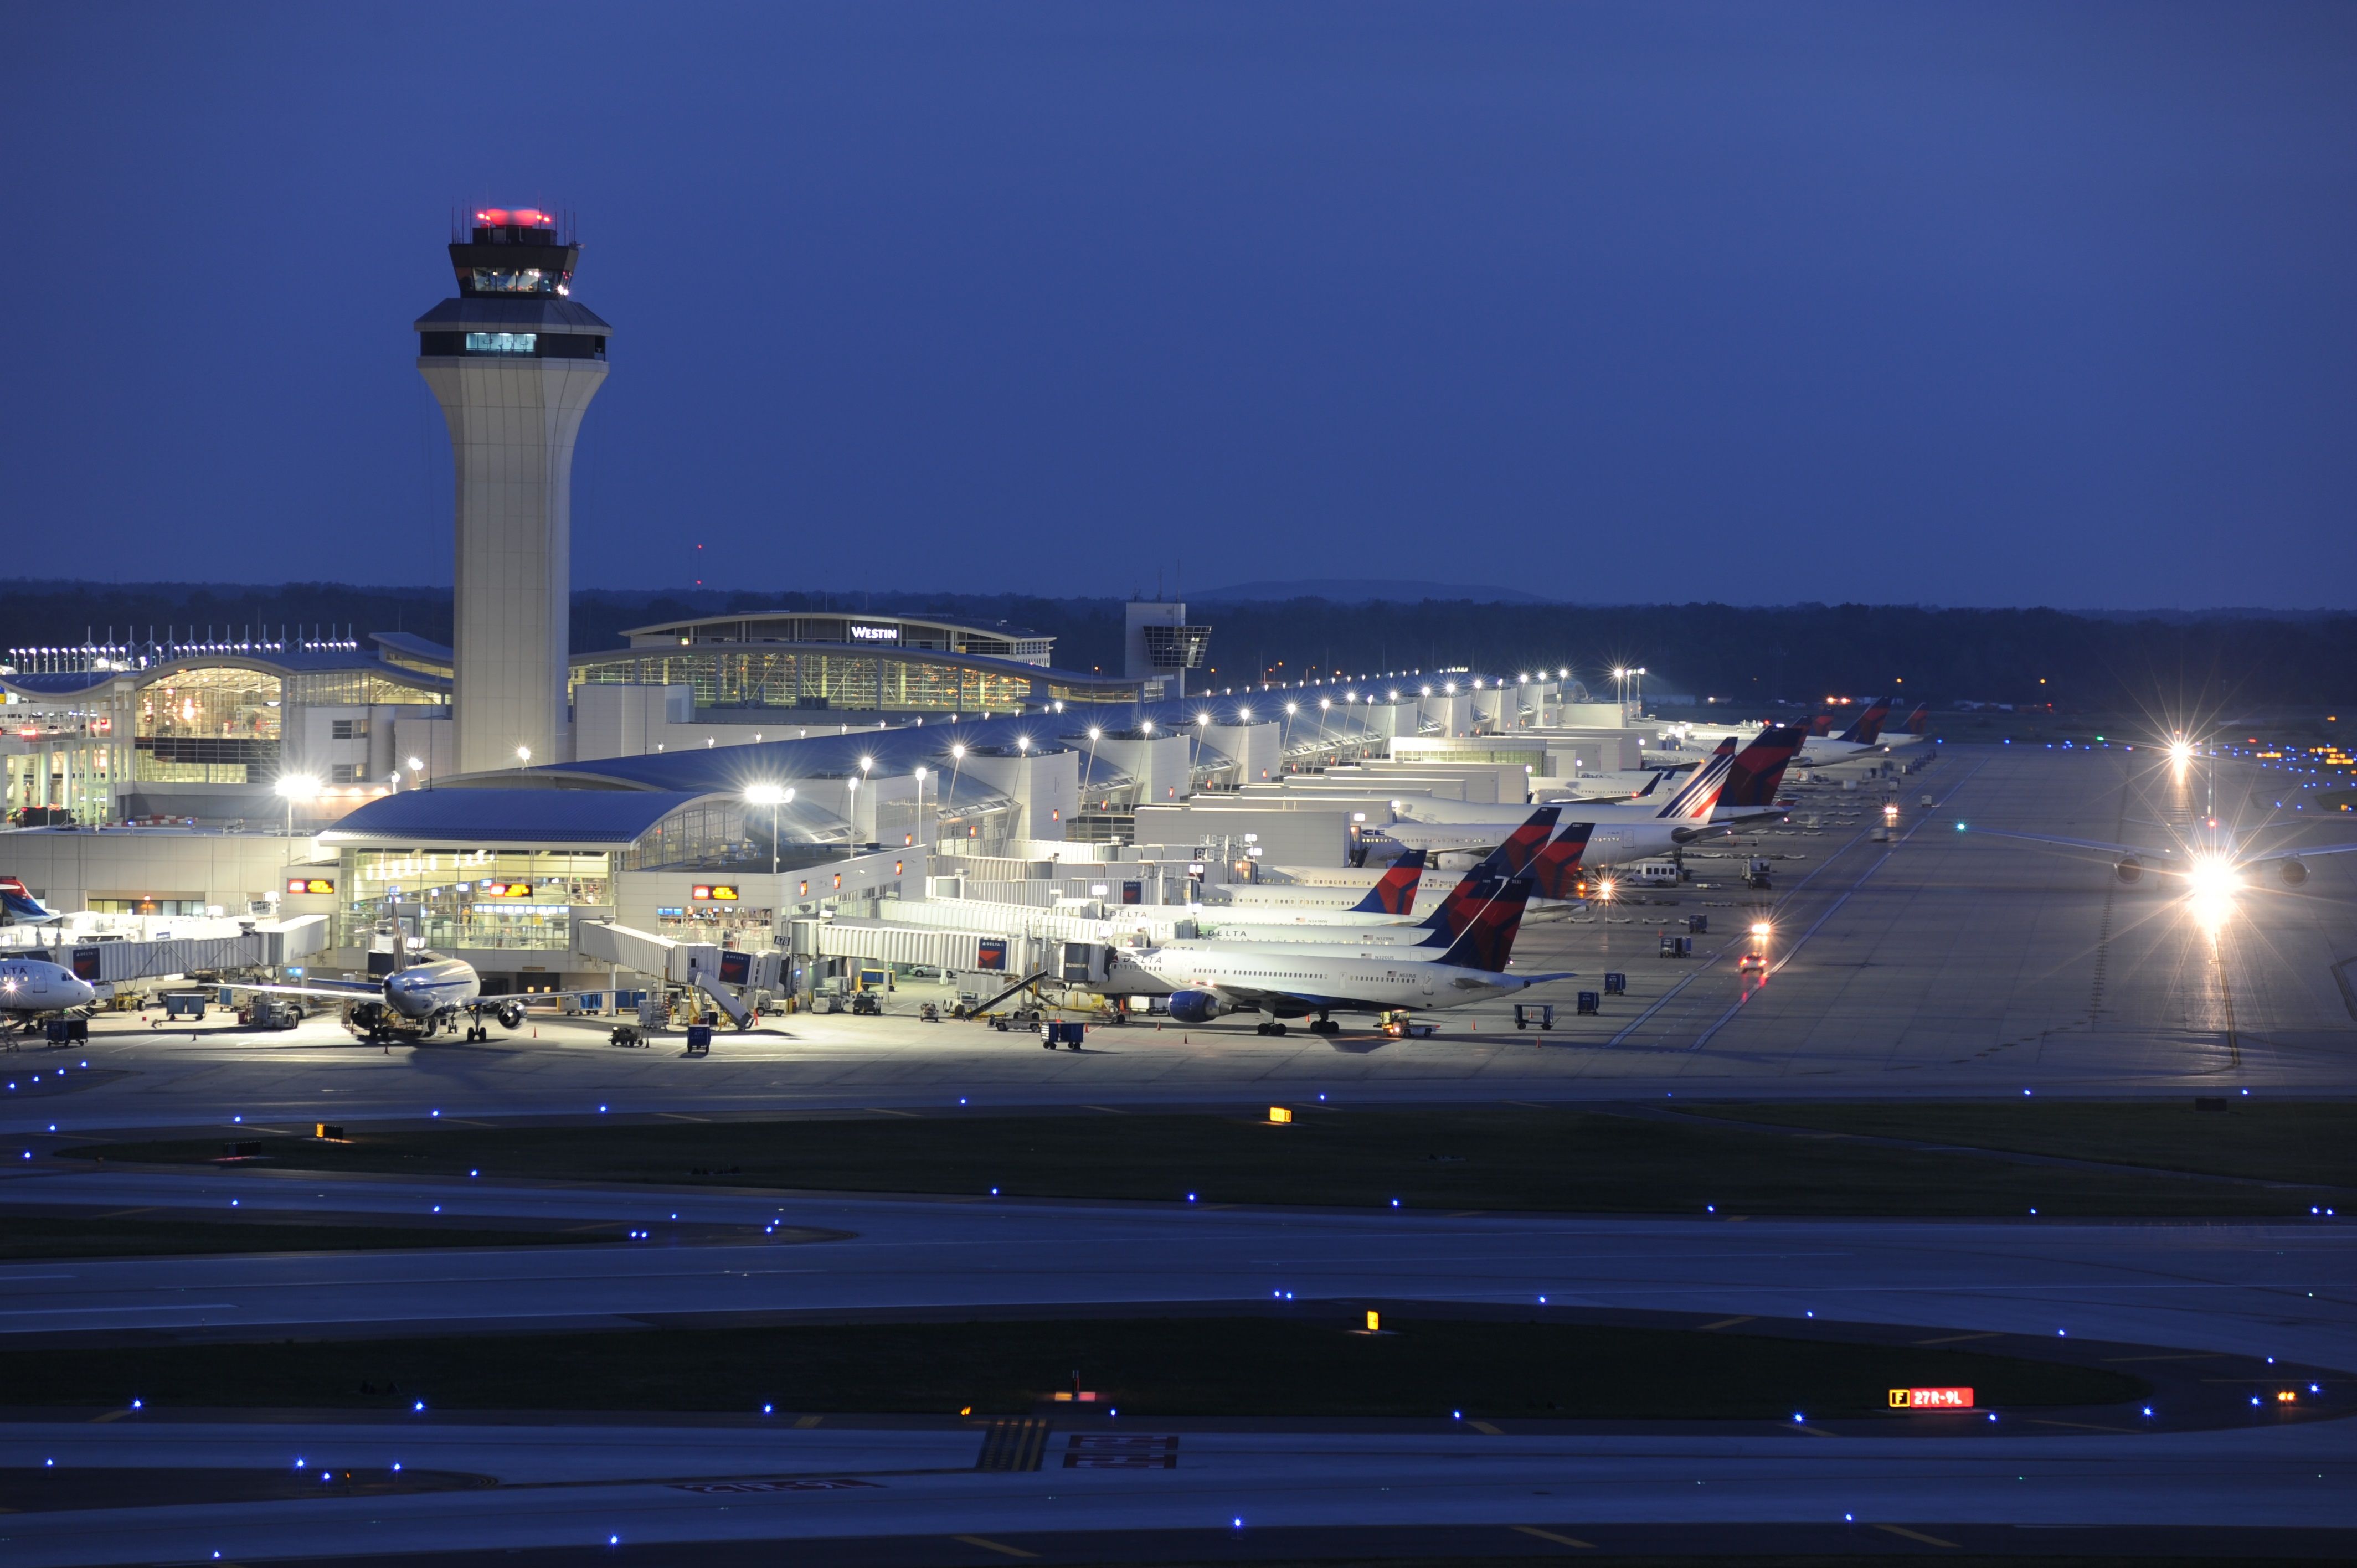 DTW Airport at night